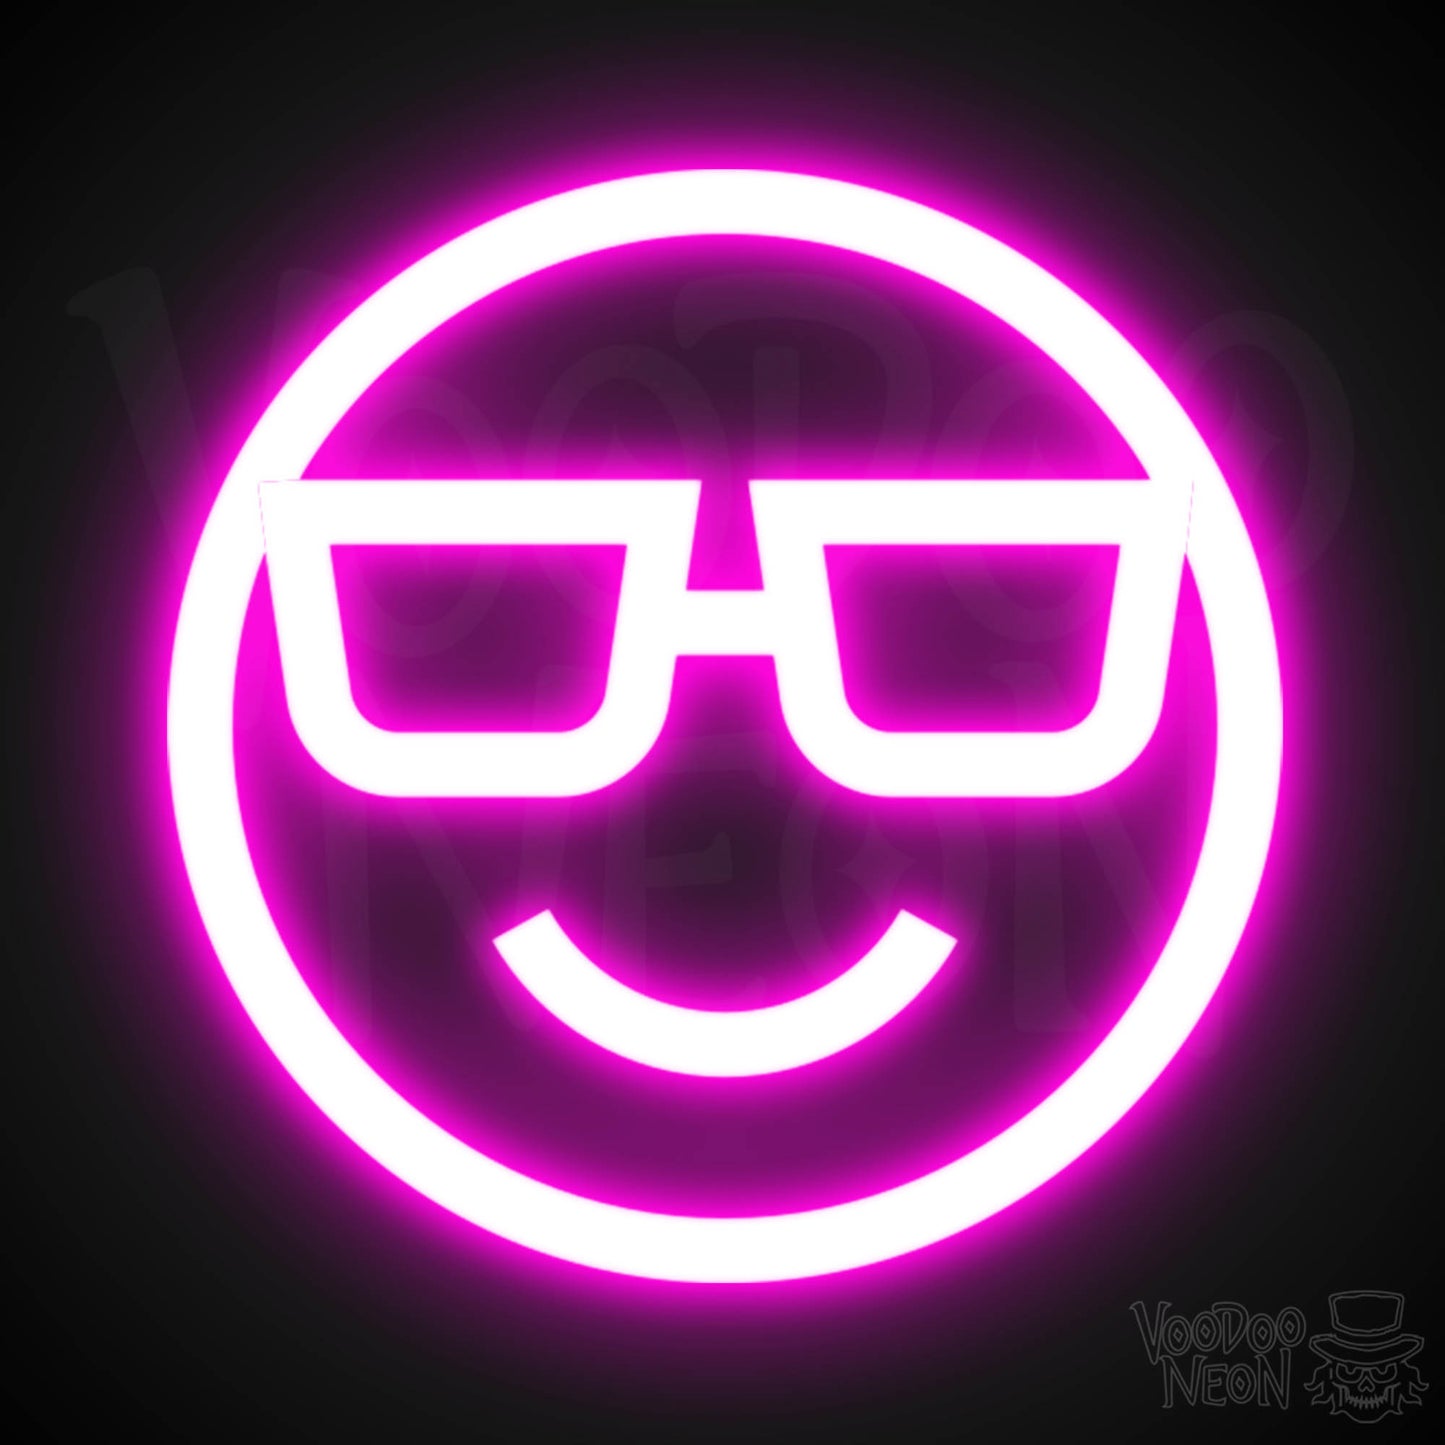 Neon Smiley Face - Smiley Face Neon Sign - LED Wall Art - Color Pink